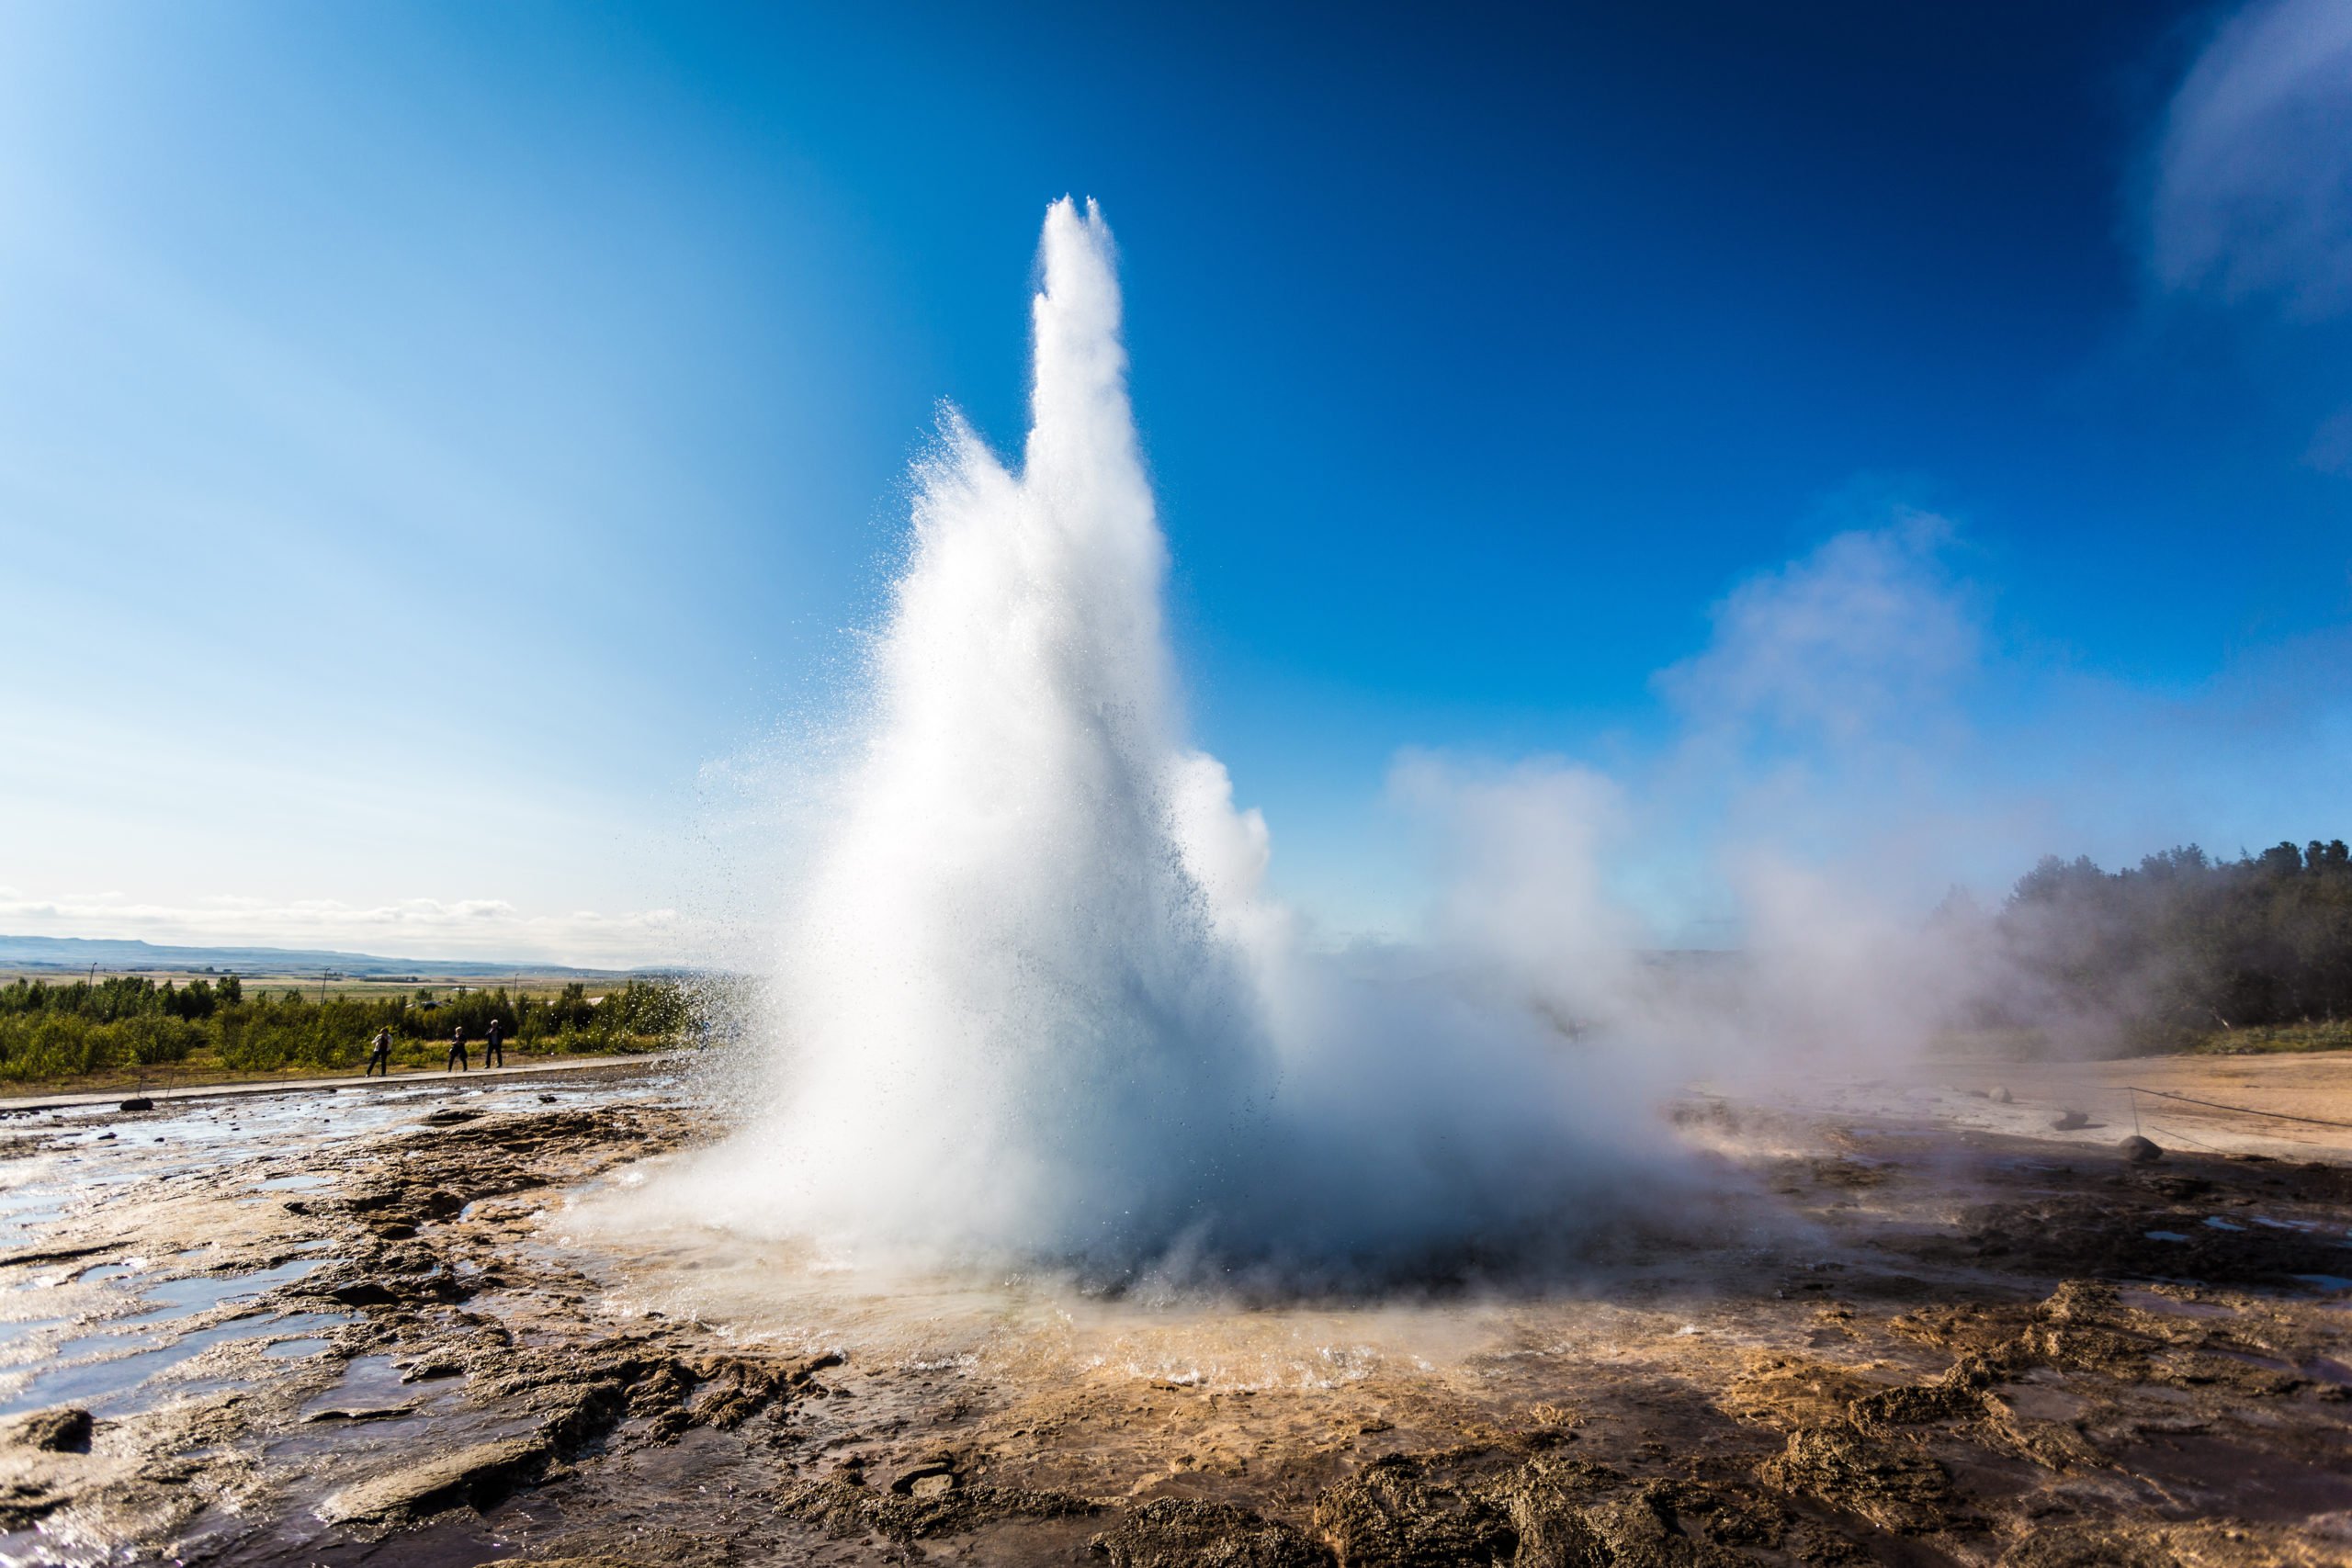 Explore The Geysir Geothermal Area On Your Golden Circle Small Group Tour